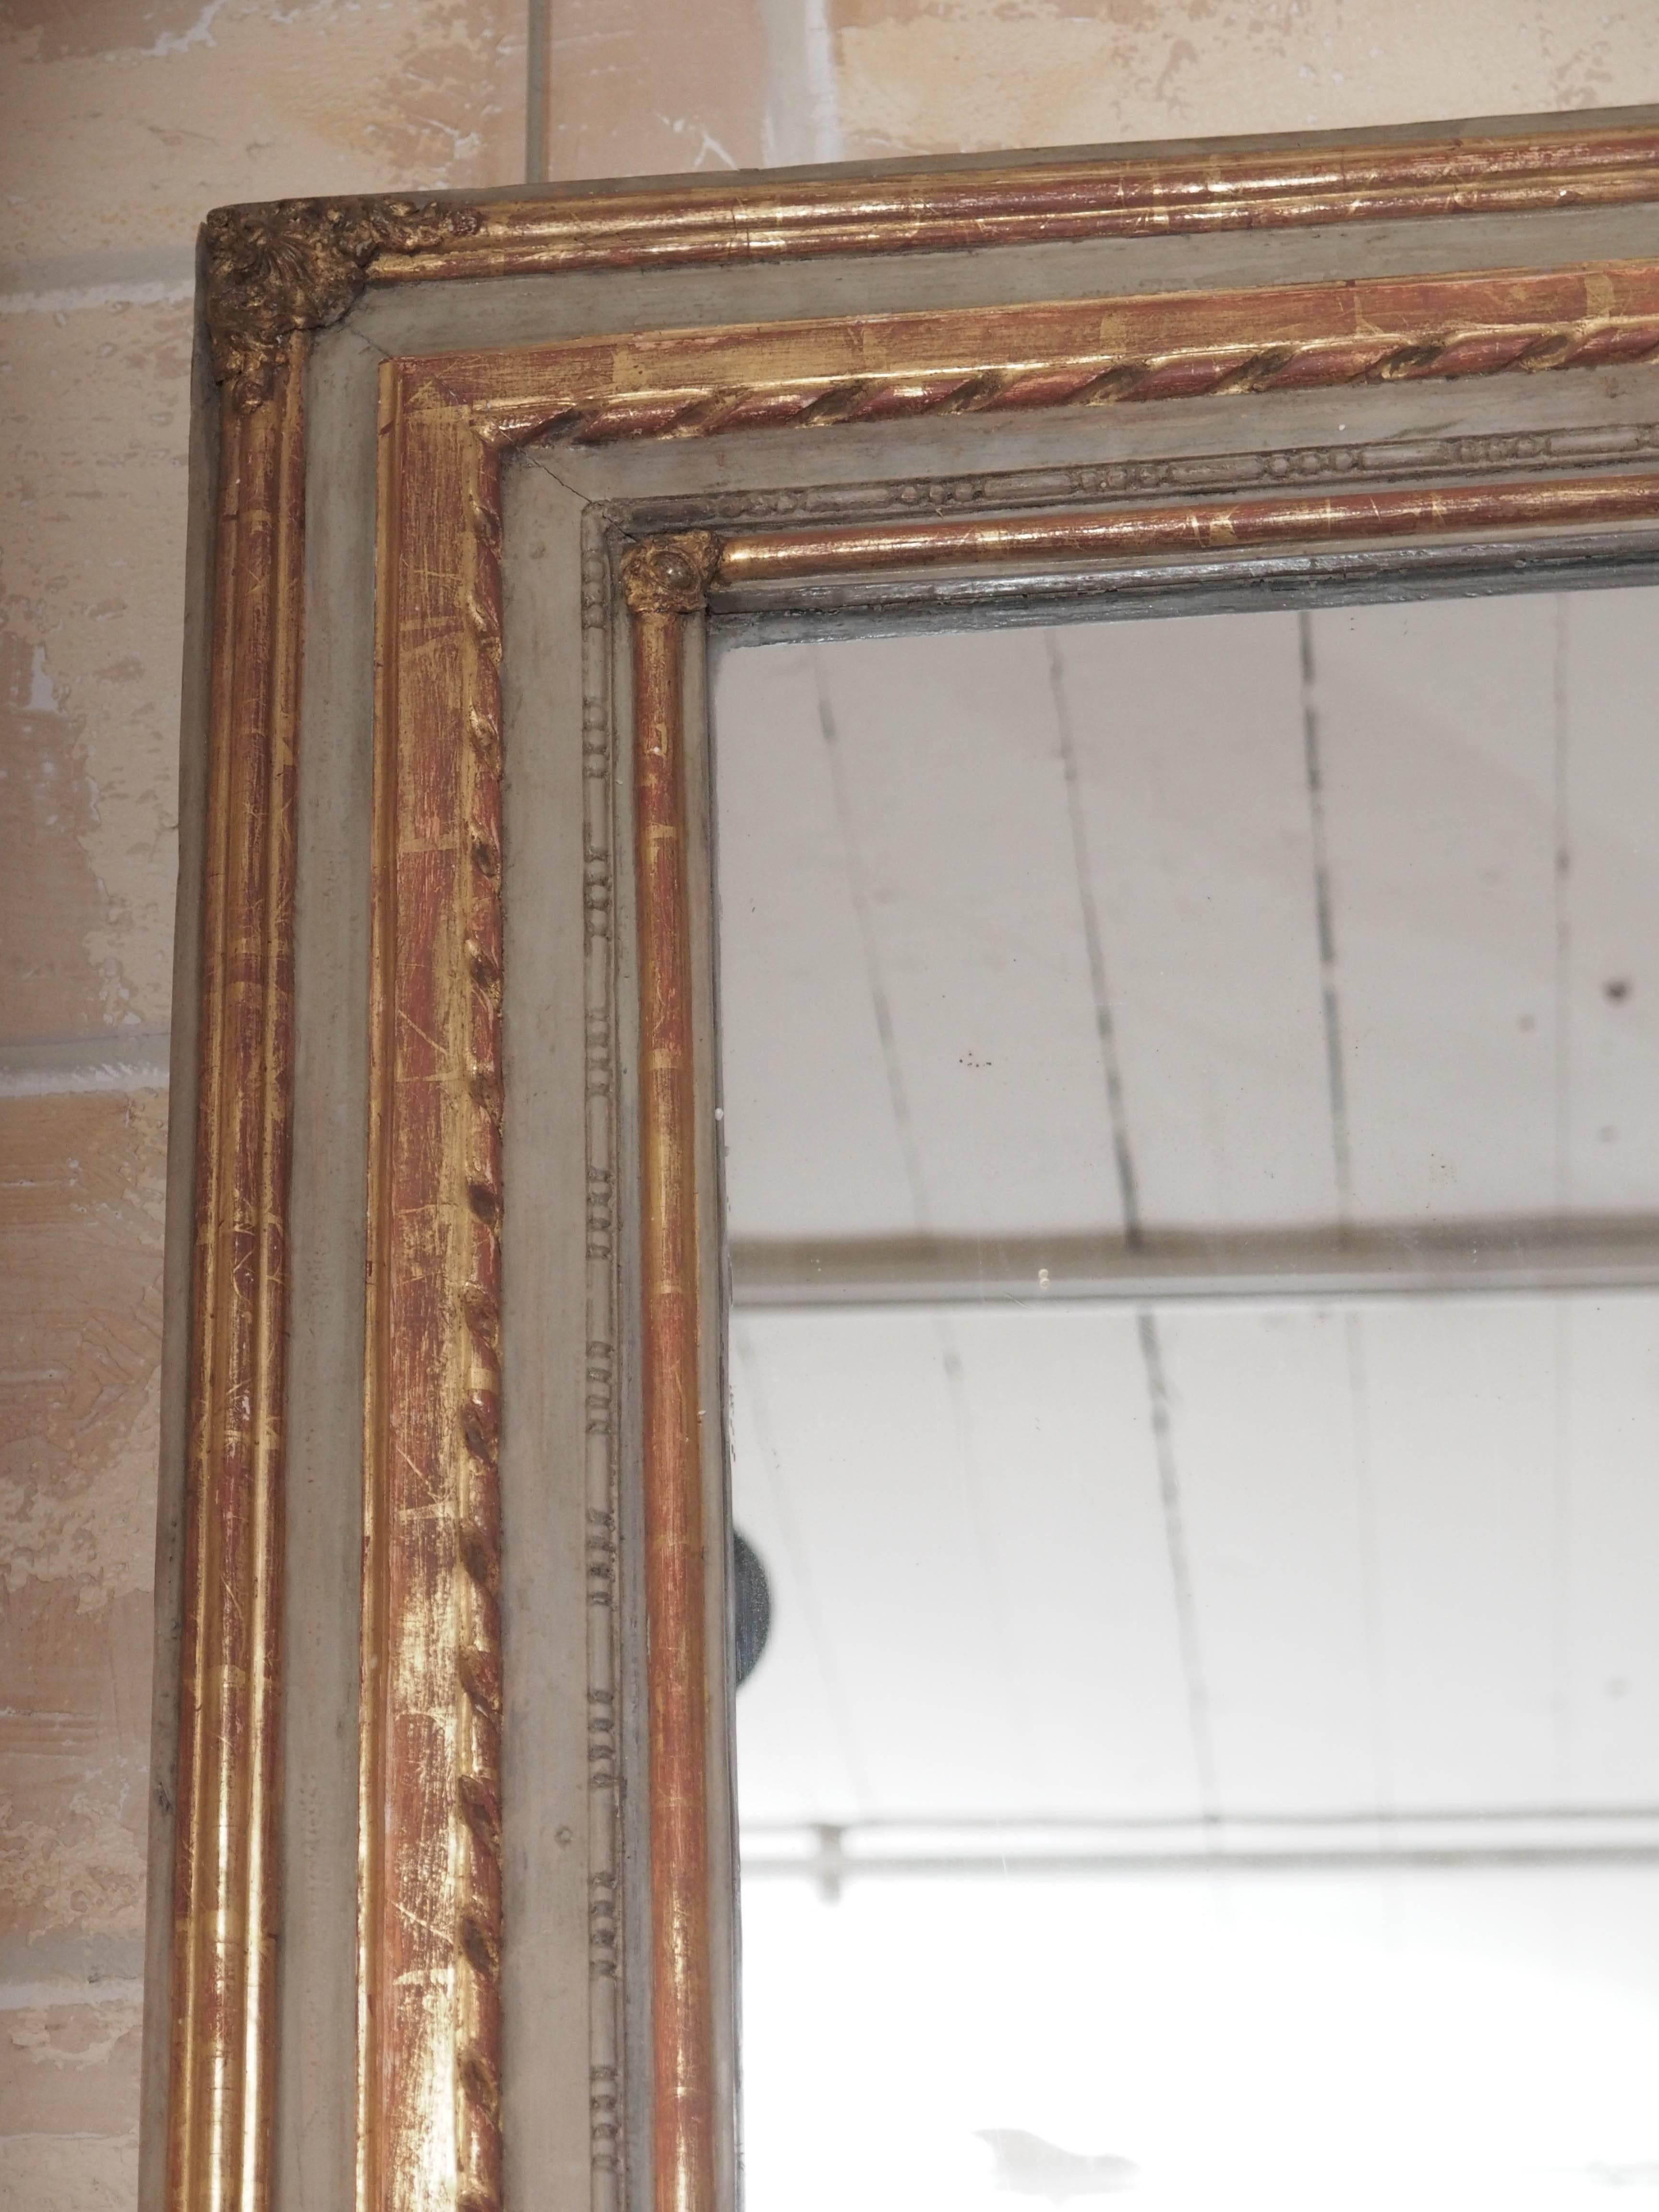 Grand late 18th century French painted and gilded mirror